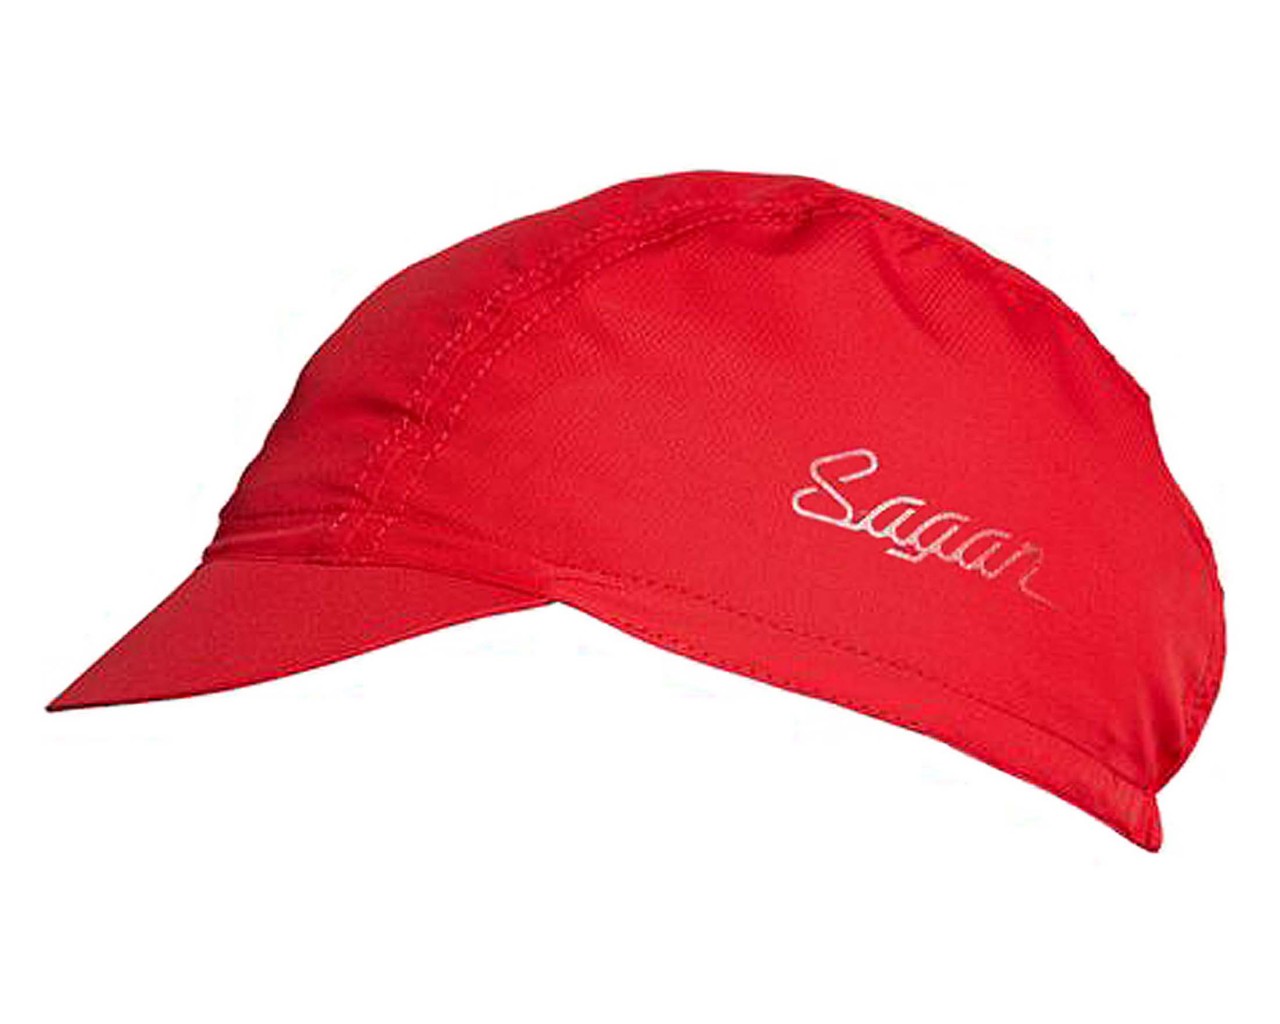 Specialized Deflect UV Cycling Cap Sagan Deconstructivism Red | red